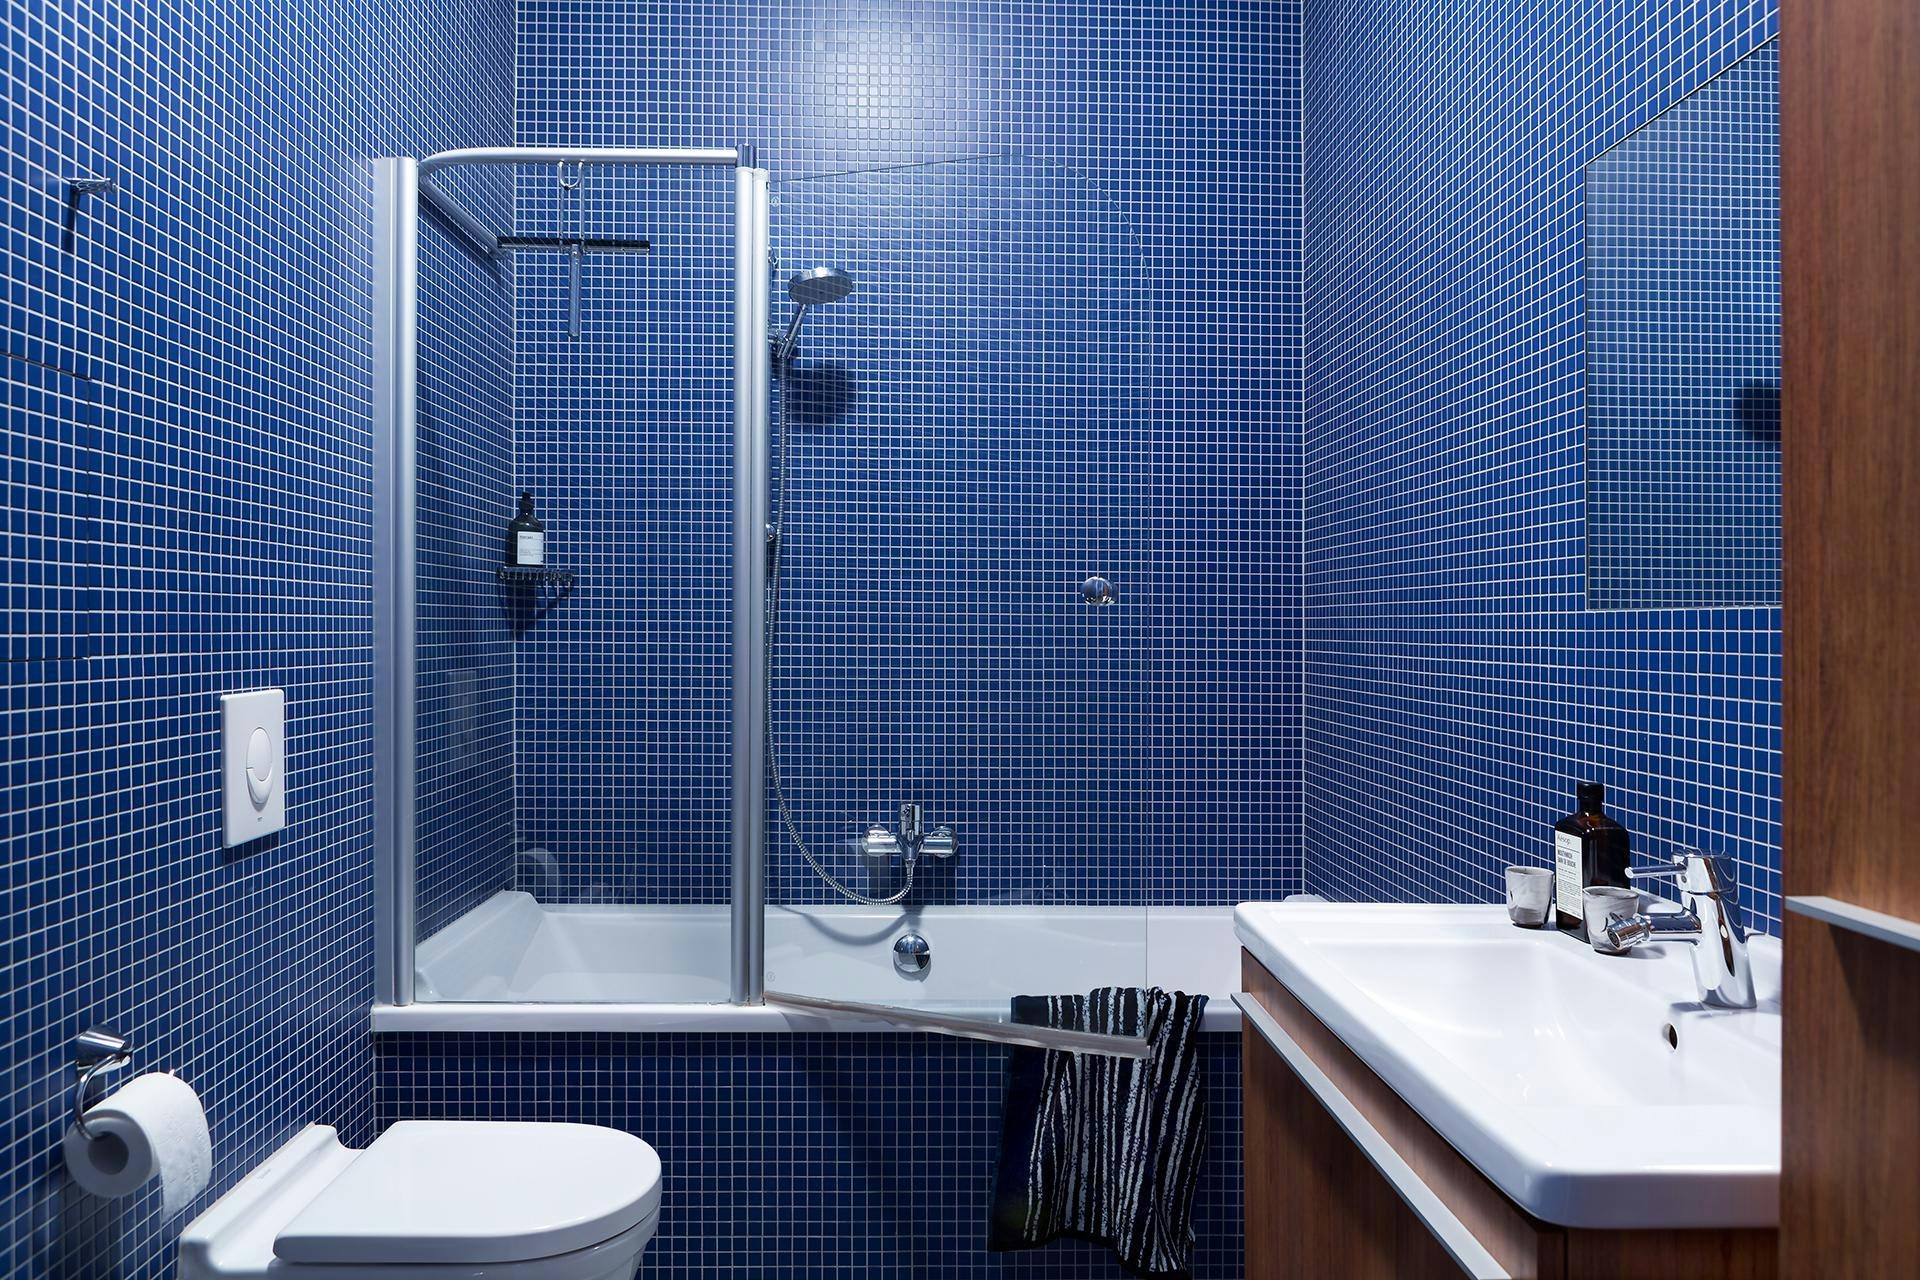 The image features a small, modern bathroom with a blue and white color scheme. The bathroom includes a shower stall, a sink, and a toilet. The shower stall is located on the left side of the bathroom, and the sink is situated on the right side. The toilet is situated in the middle of the bathroom.

The bathroom is well-lit, with a bright light illuminating the space. The blue and white tiles on the walls and floor create a visually appealing and clean look. The bathroom appears to be clean and well-